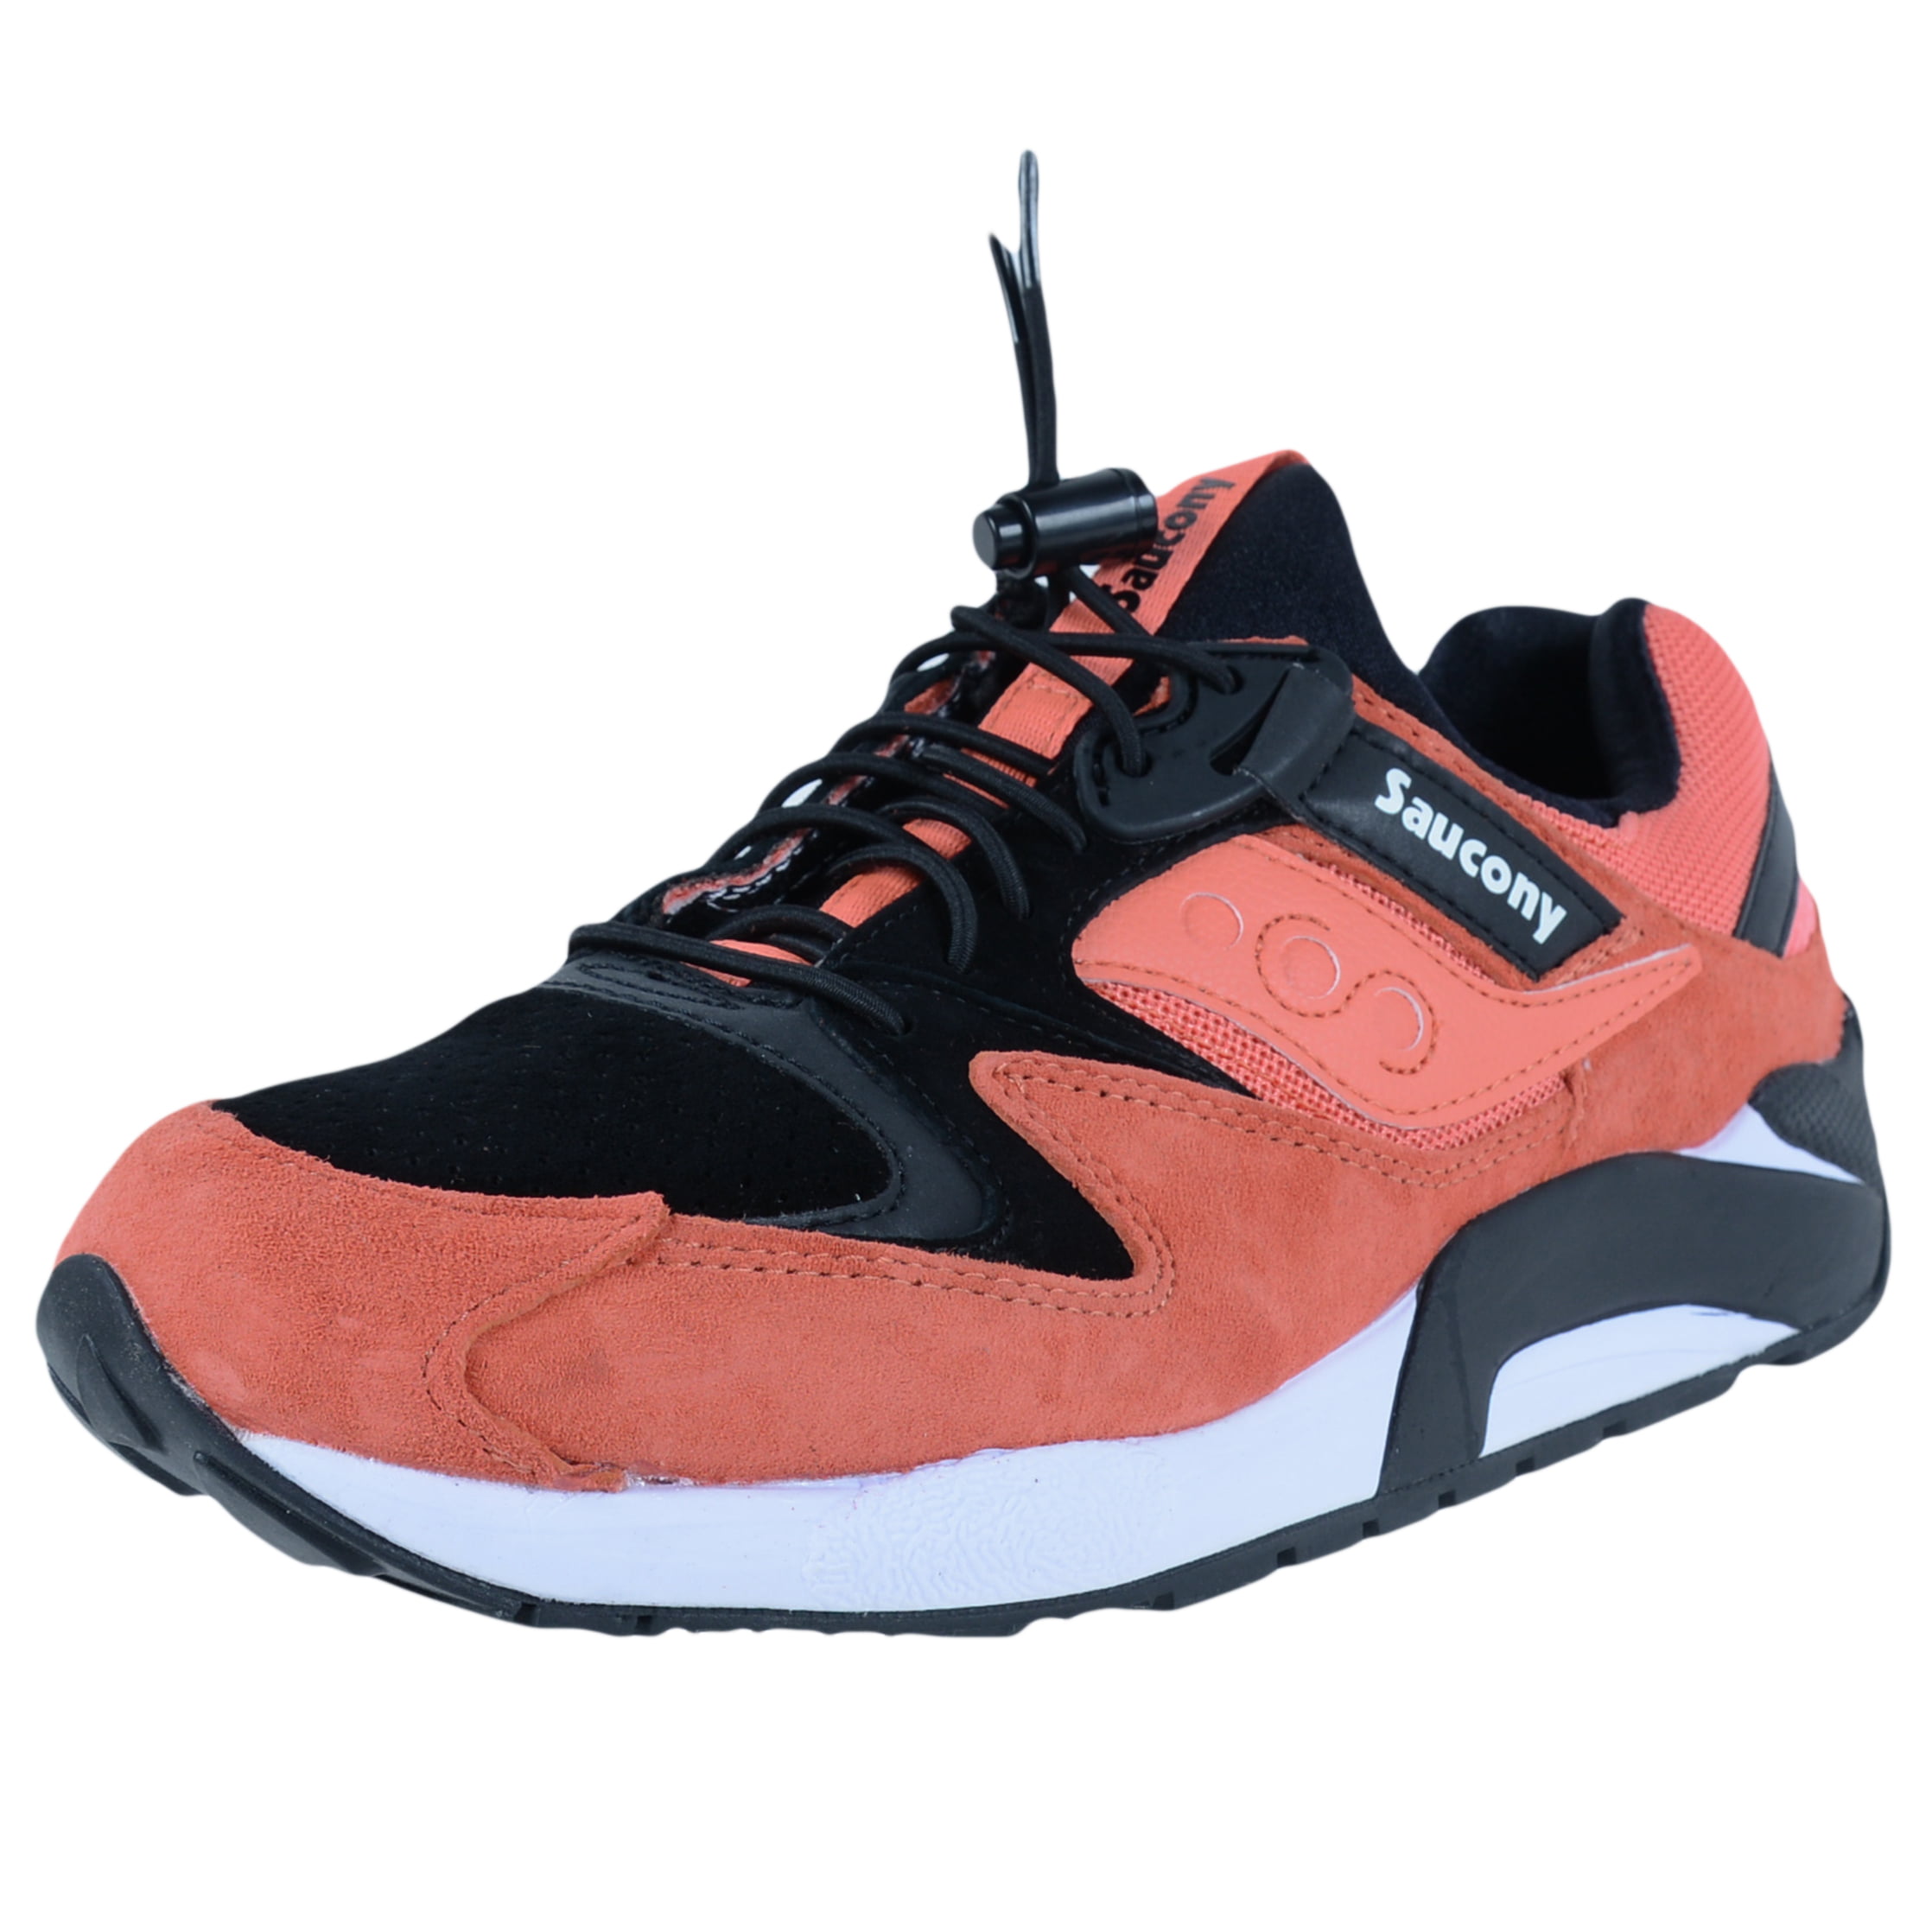 saucony grid 9000 bungee pack review